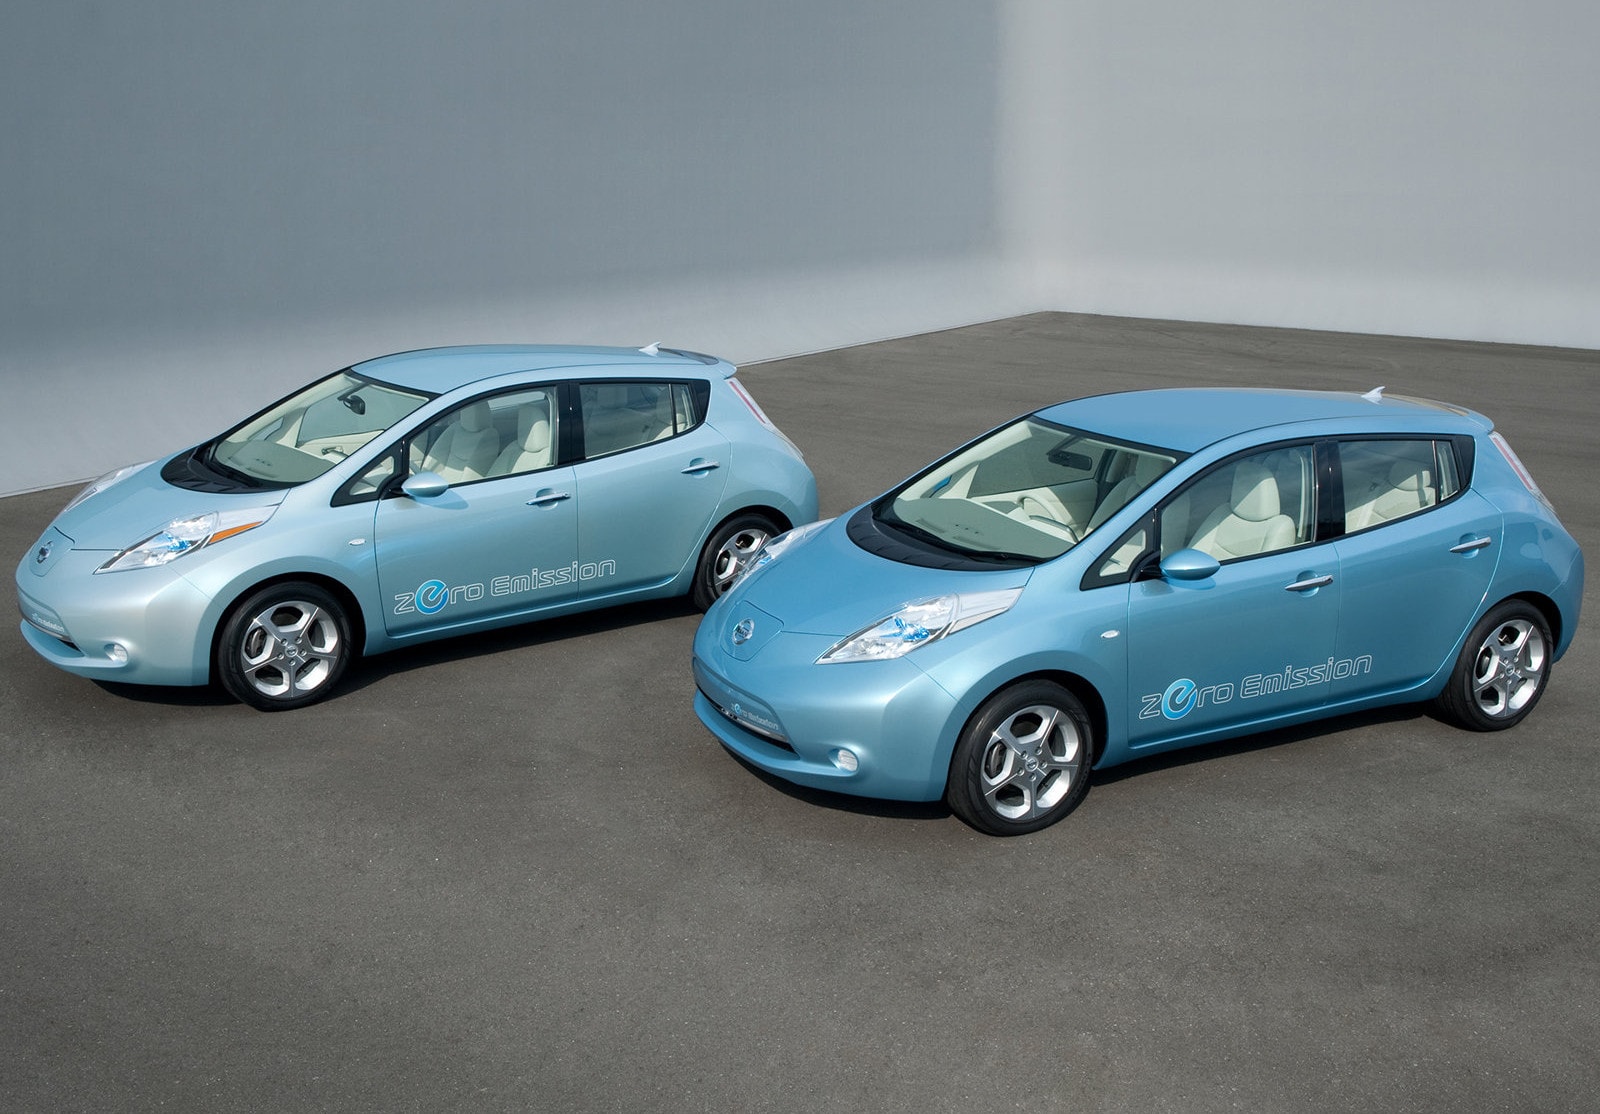 Compare chevy volt to nissan leaf #7